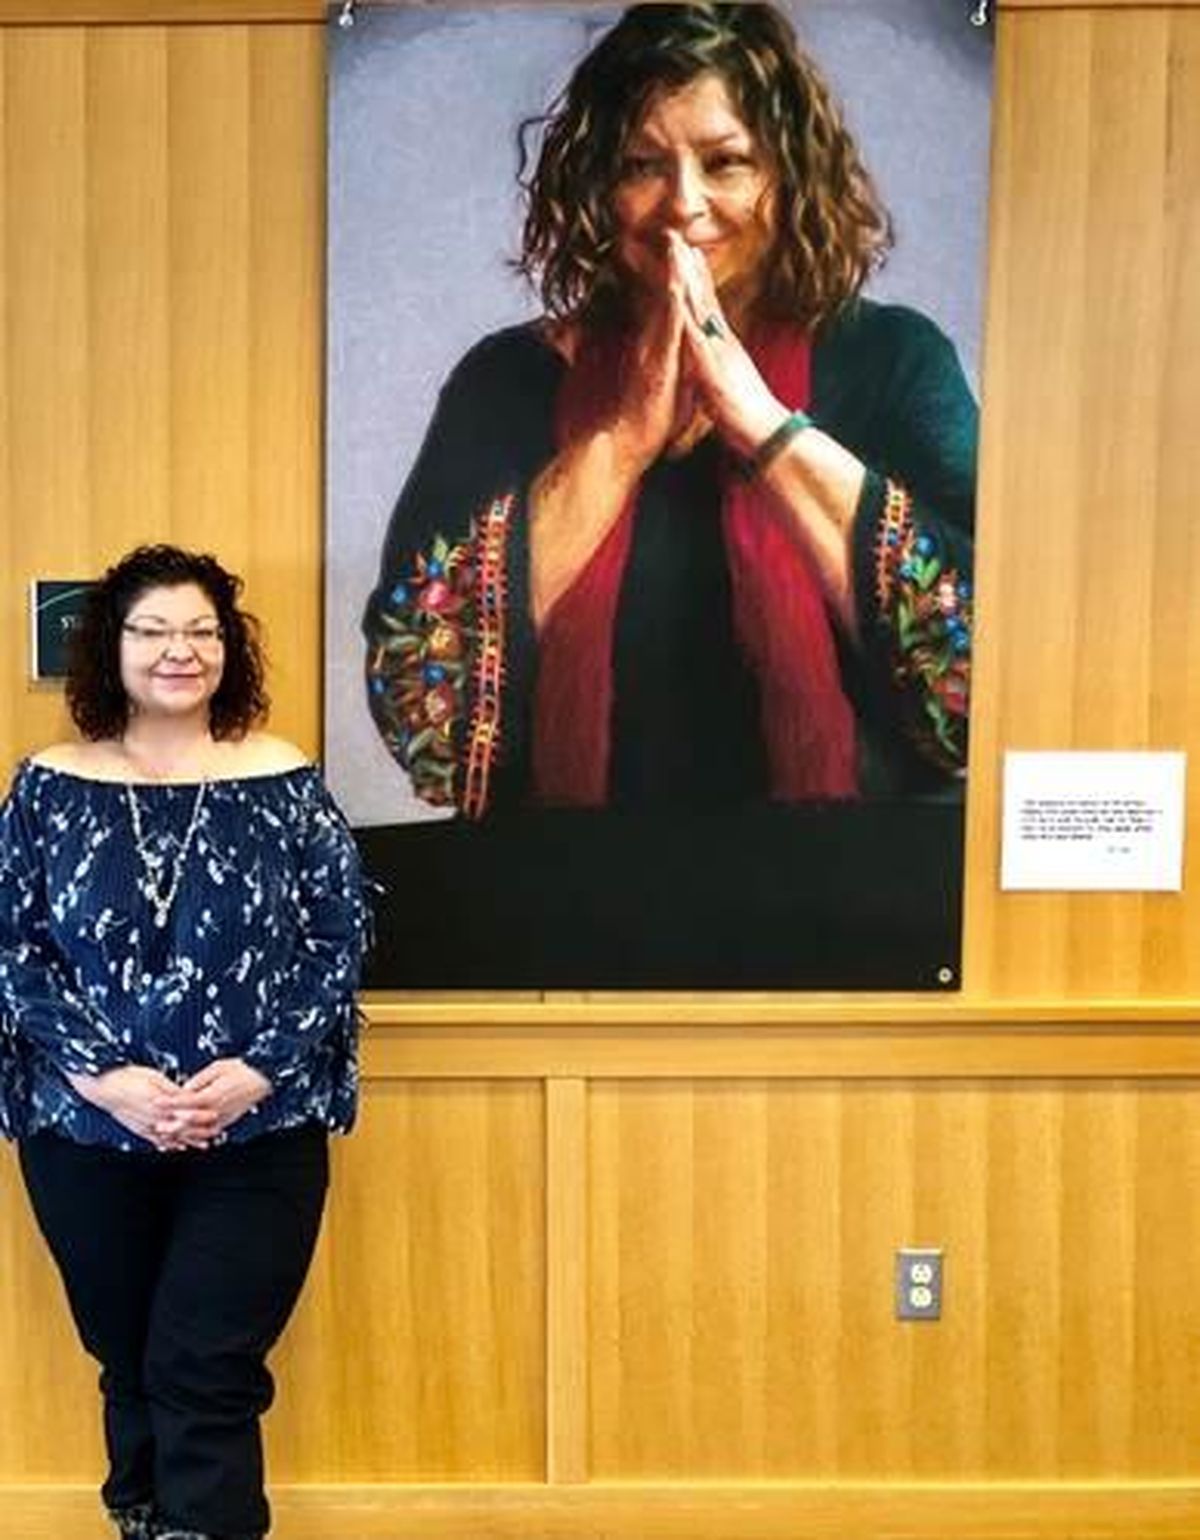 “If You Really Knew Me” features large-scale portraits of survivors of domestic violence and trafficking.